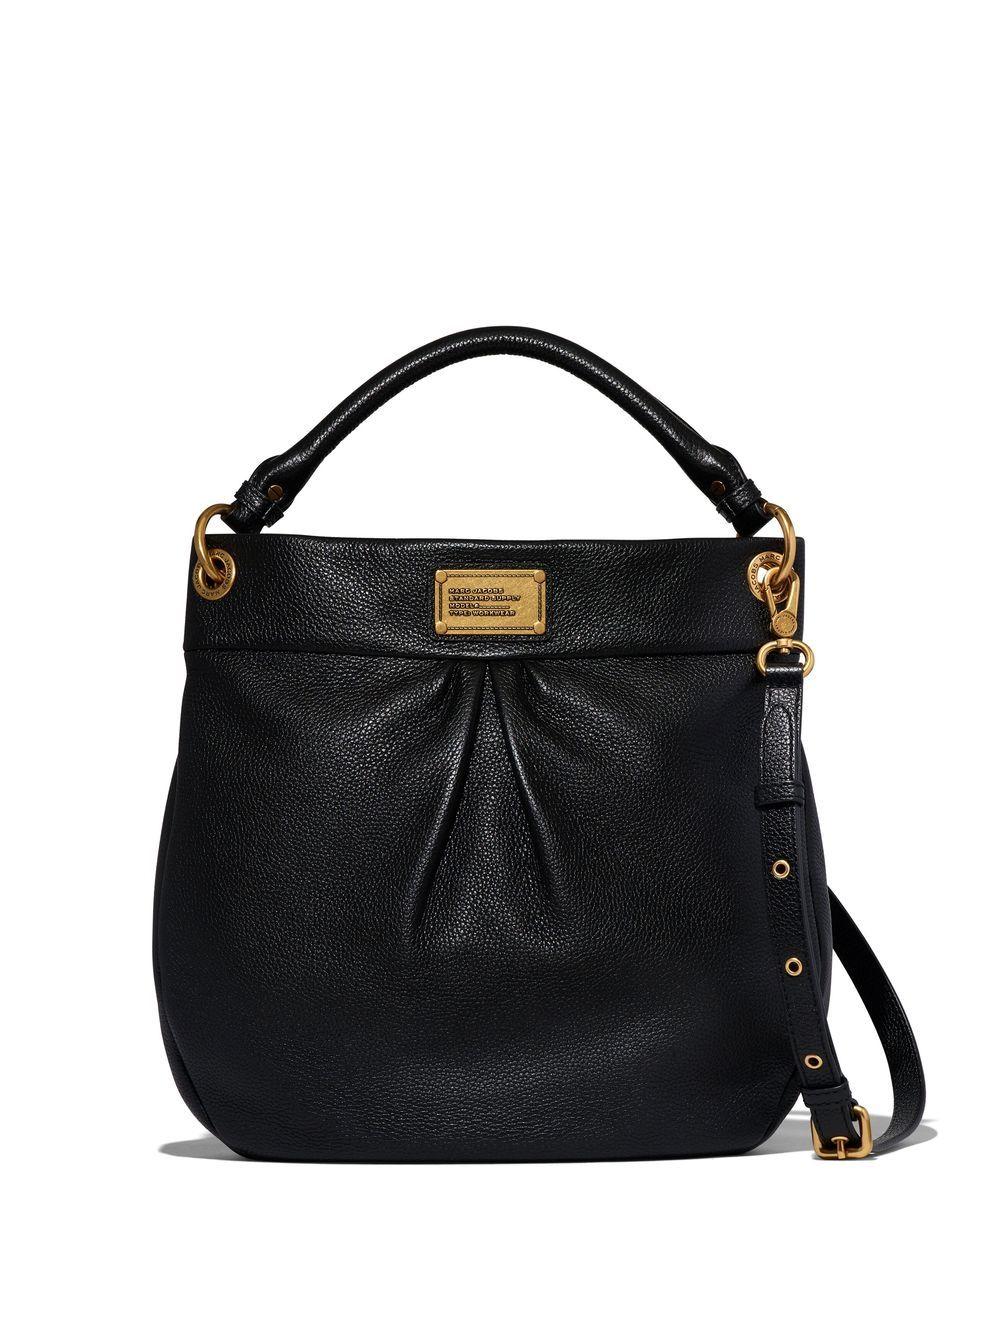 Marc Jacobs Re-edition Hillier Hobo Bag in Black | Lyst